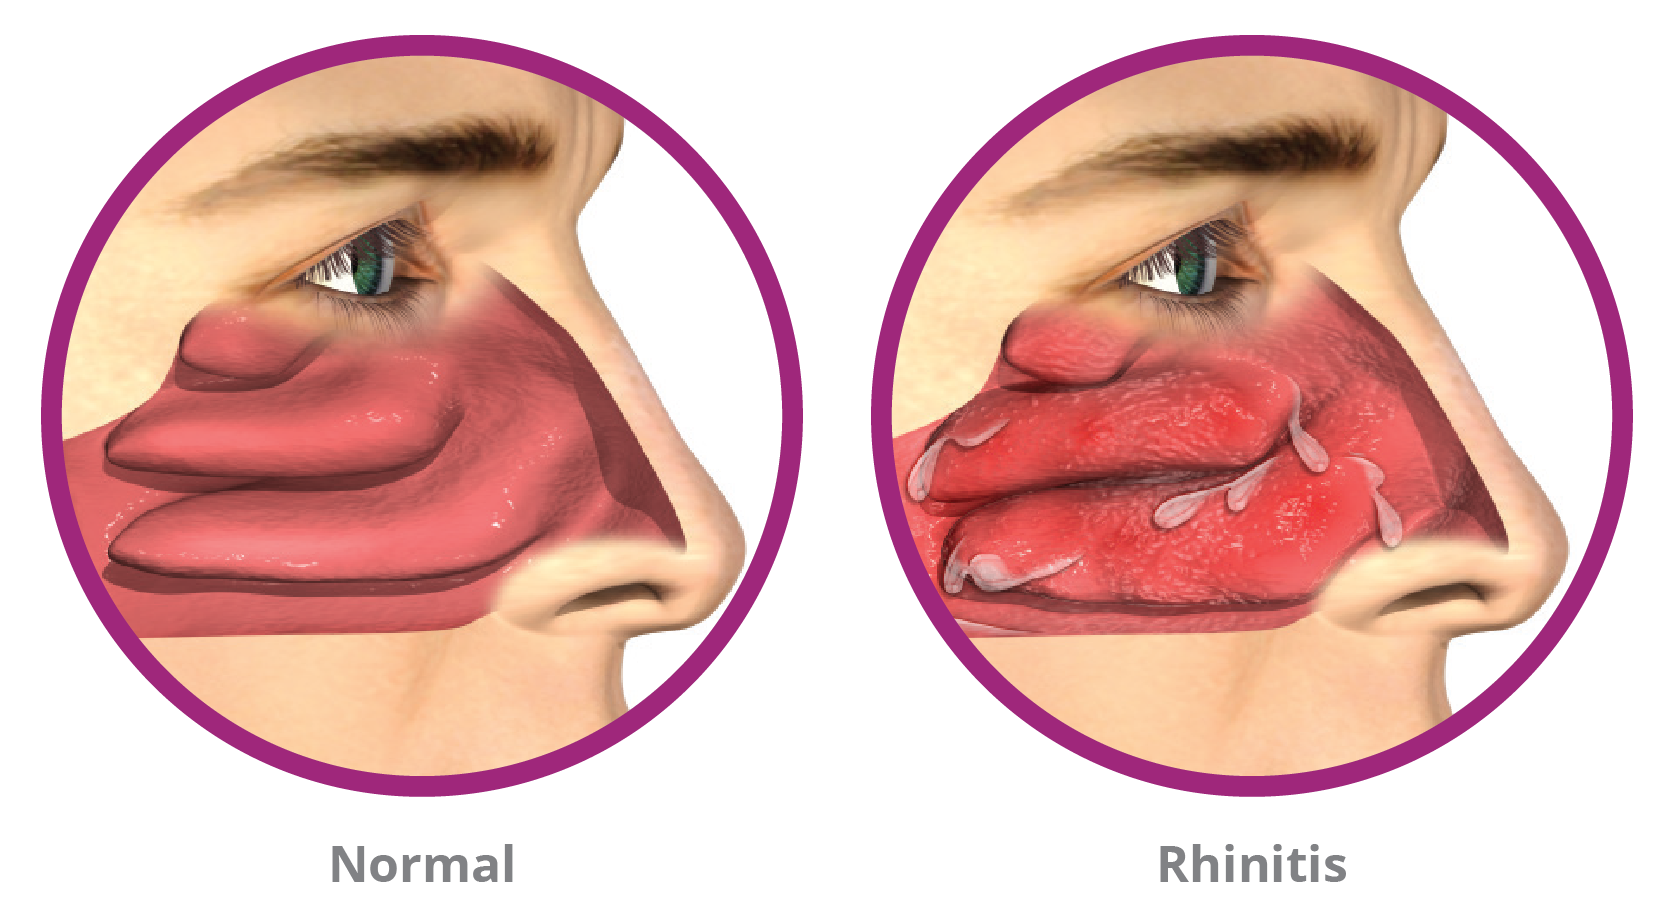 Illustration of normal nasal passages and rhinitis